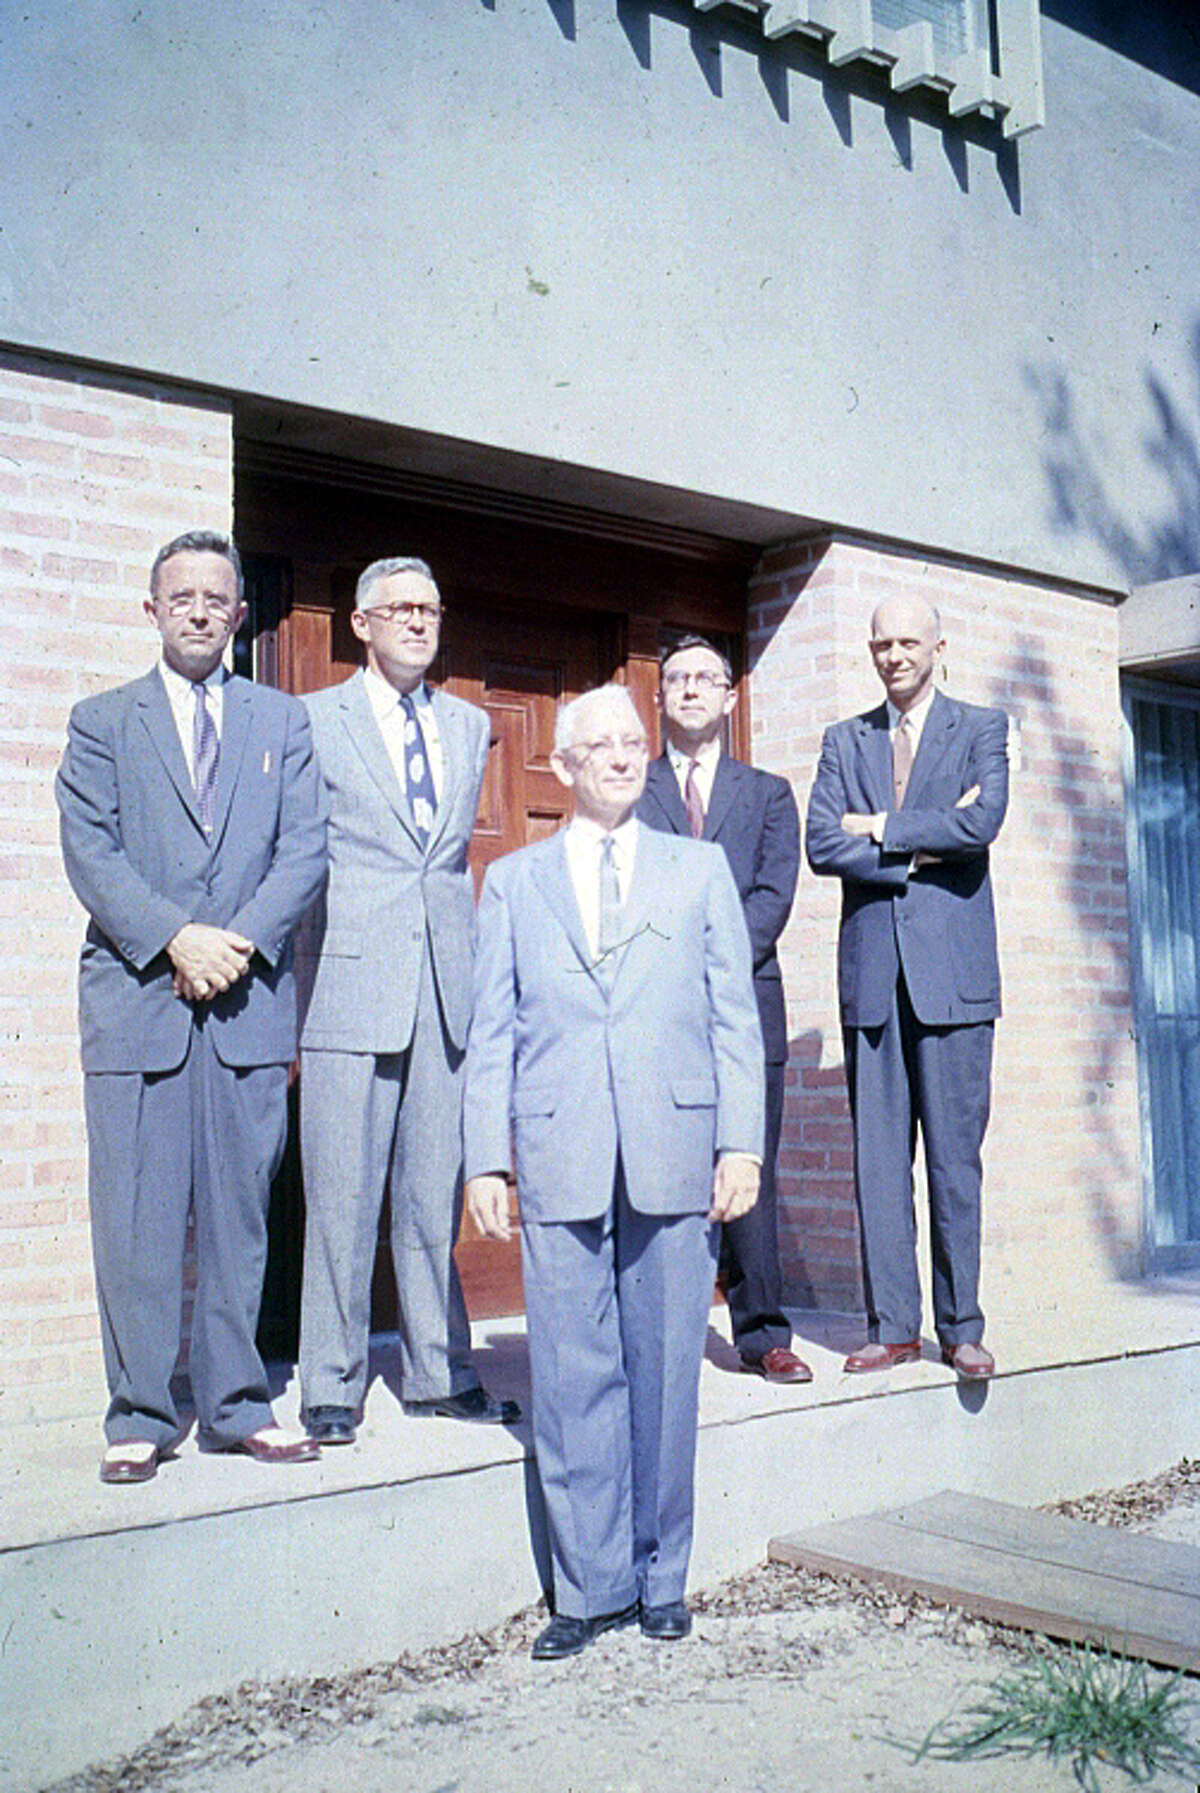 The masters of Rice's then five colleges, standing just outside the entrance to a campus building in 1957.